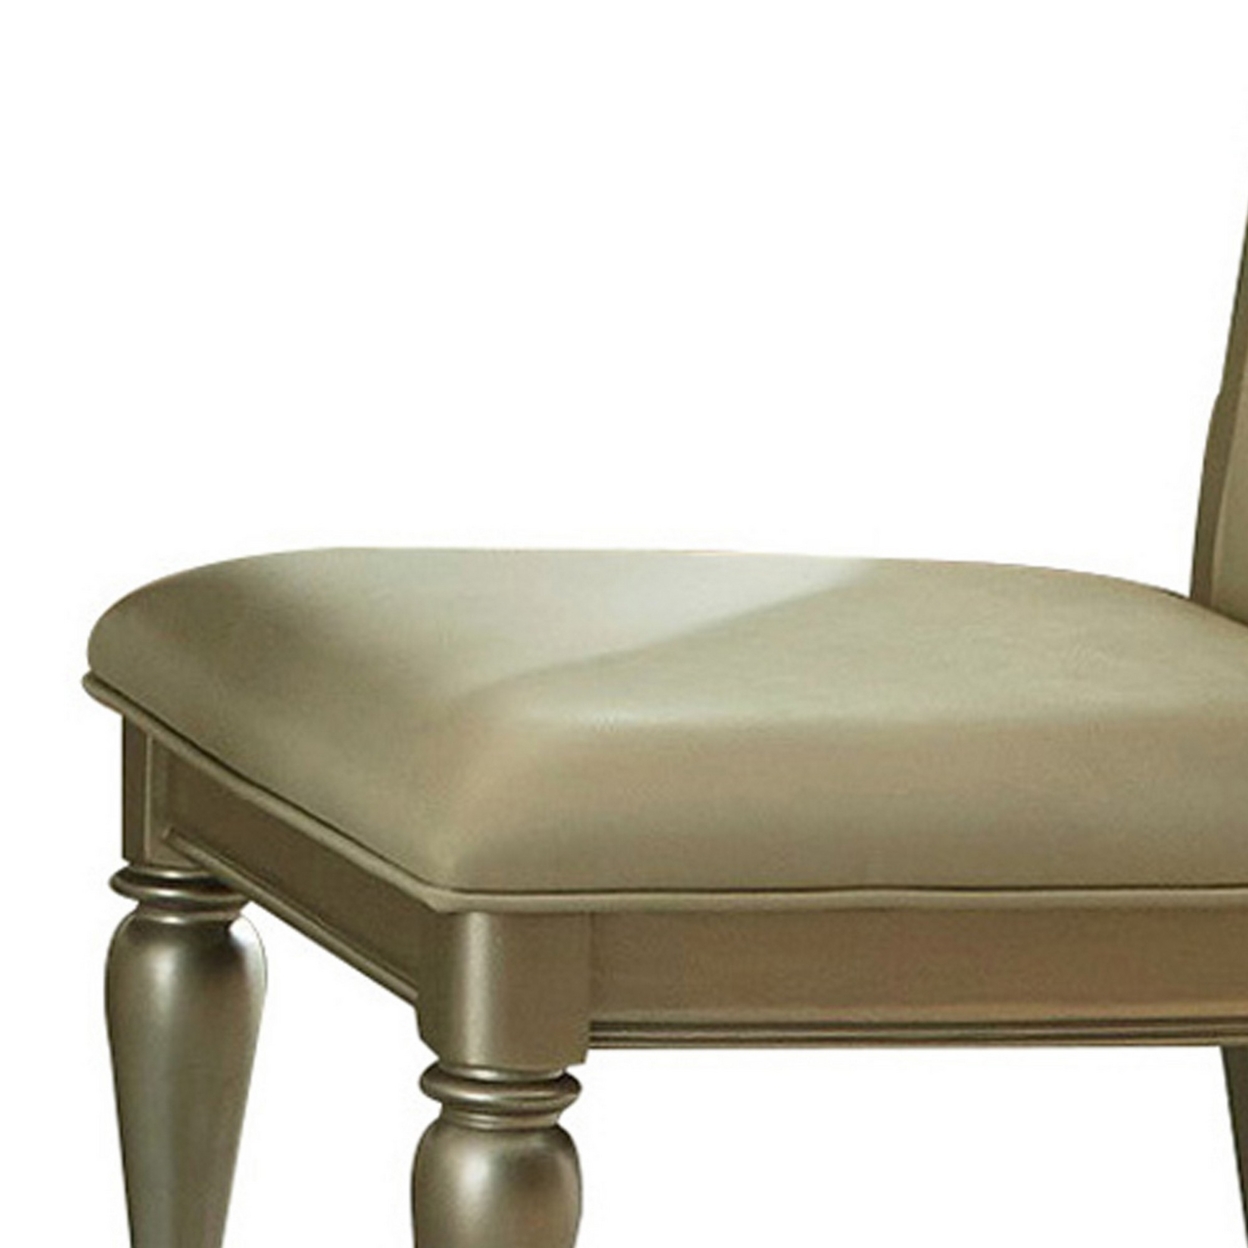 Wooden Side Chair With Crystal Tufted Leatherette Backrest, Gold- Saltoro Sherpi